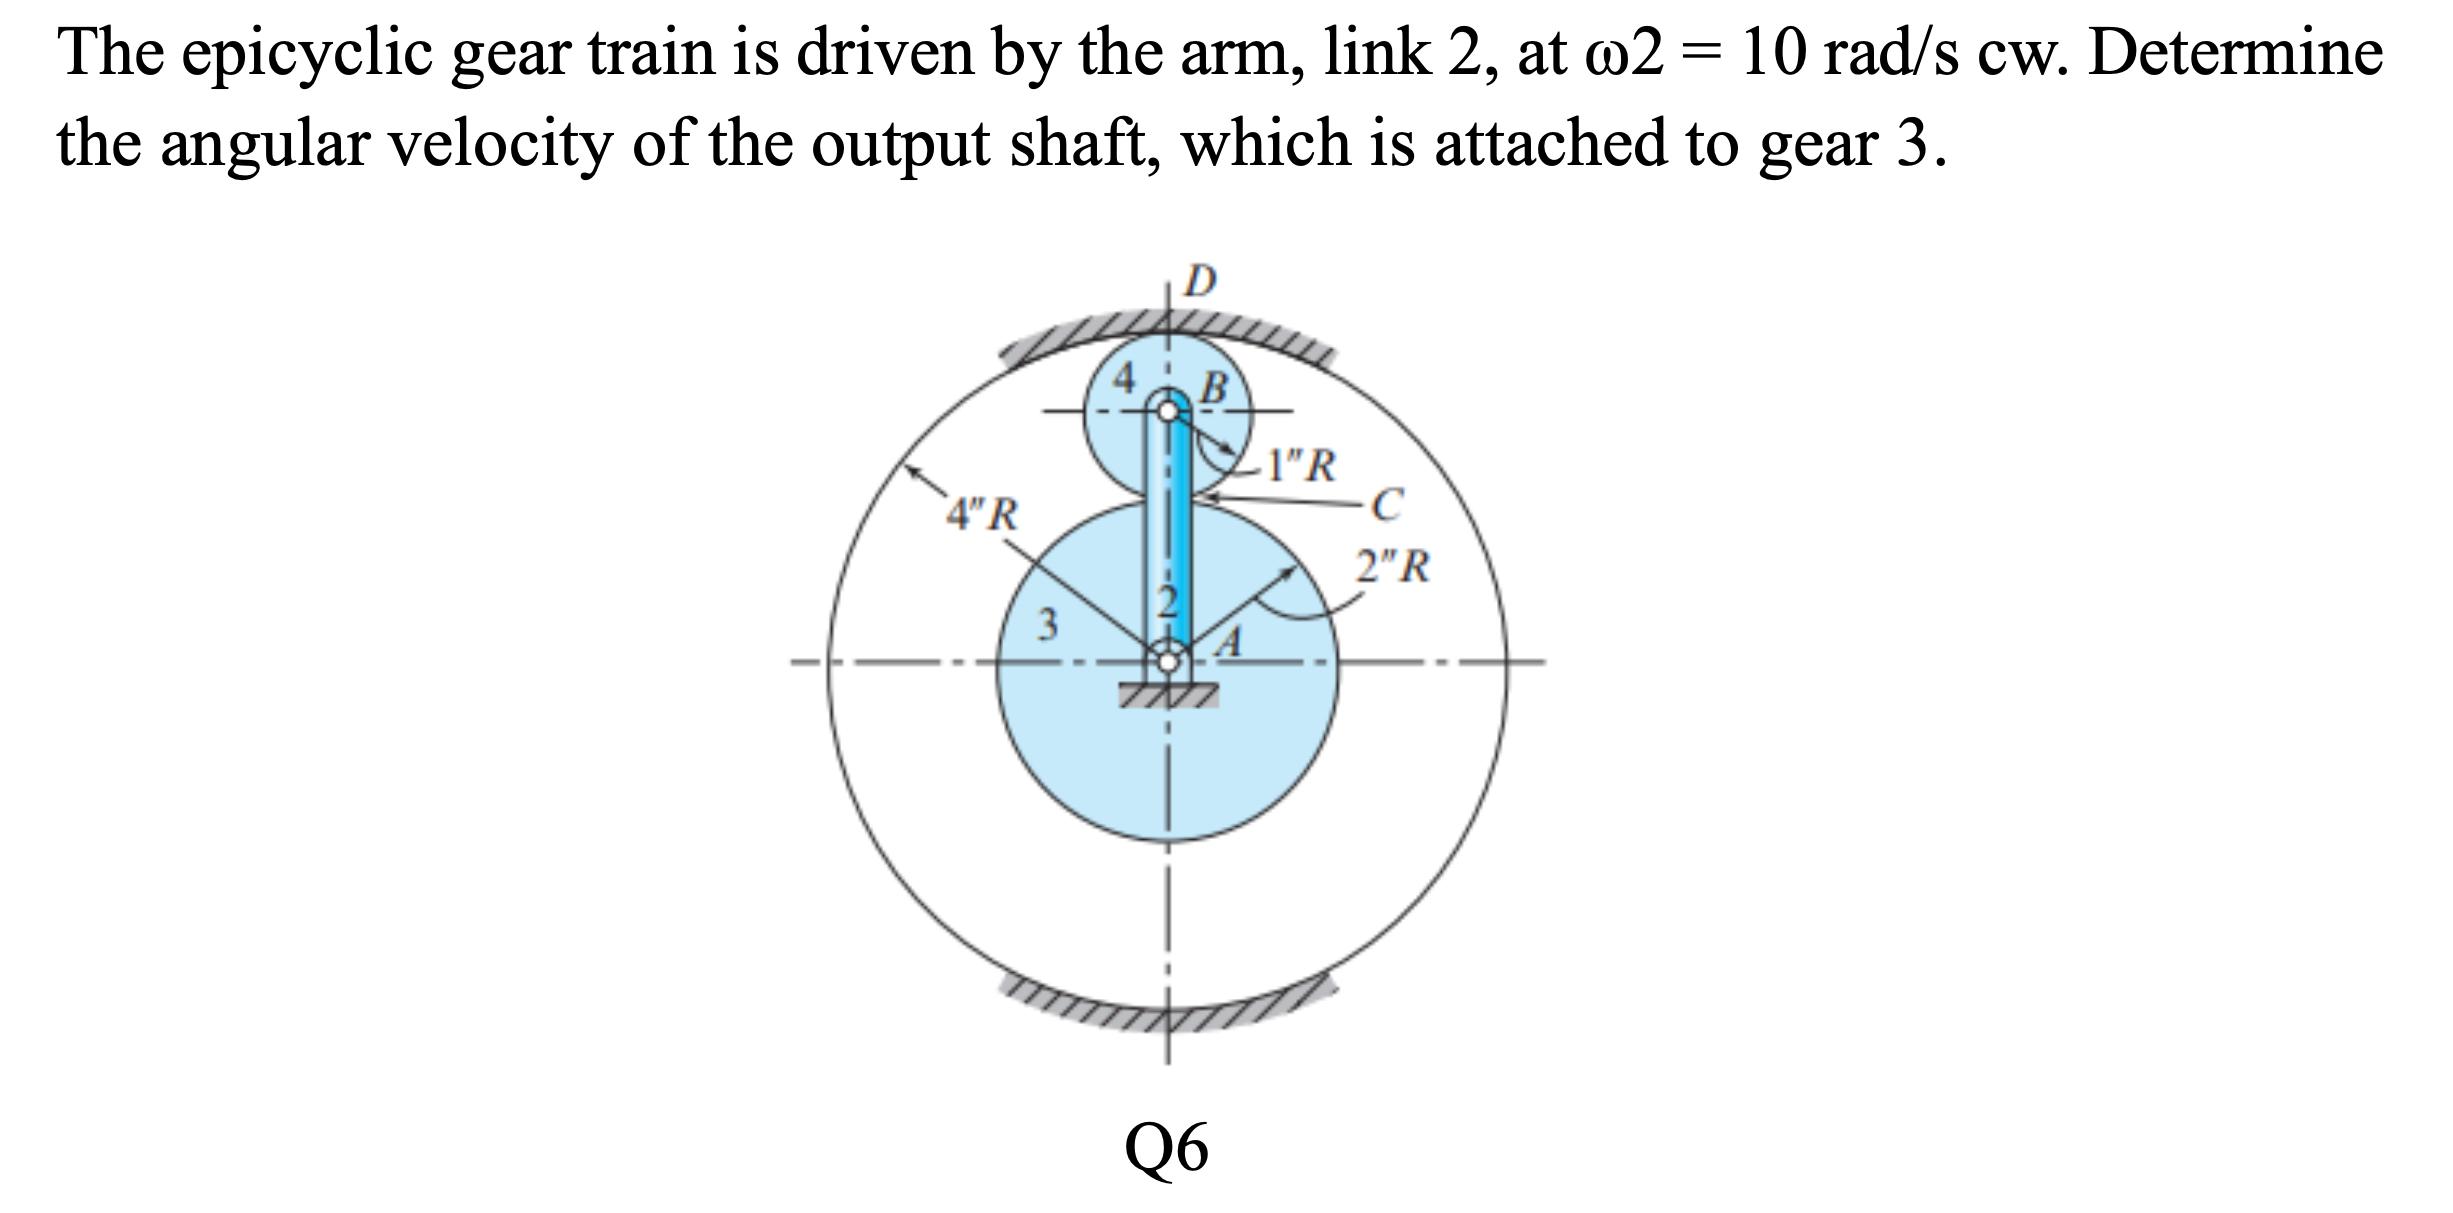 The epicyclic gear train is driven by the arm, link 2, at o2 = 10 rad/s cw. Determine the angular velocity of